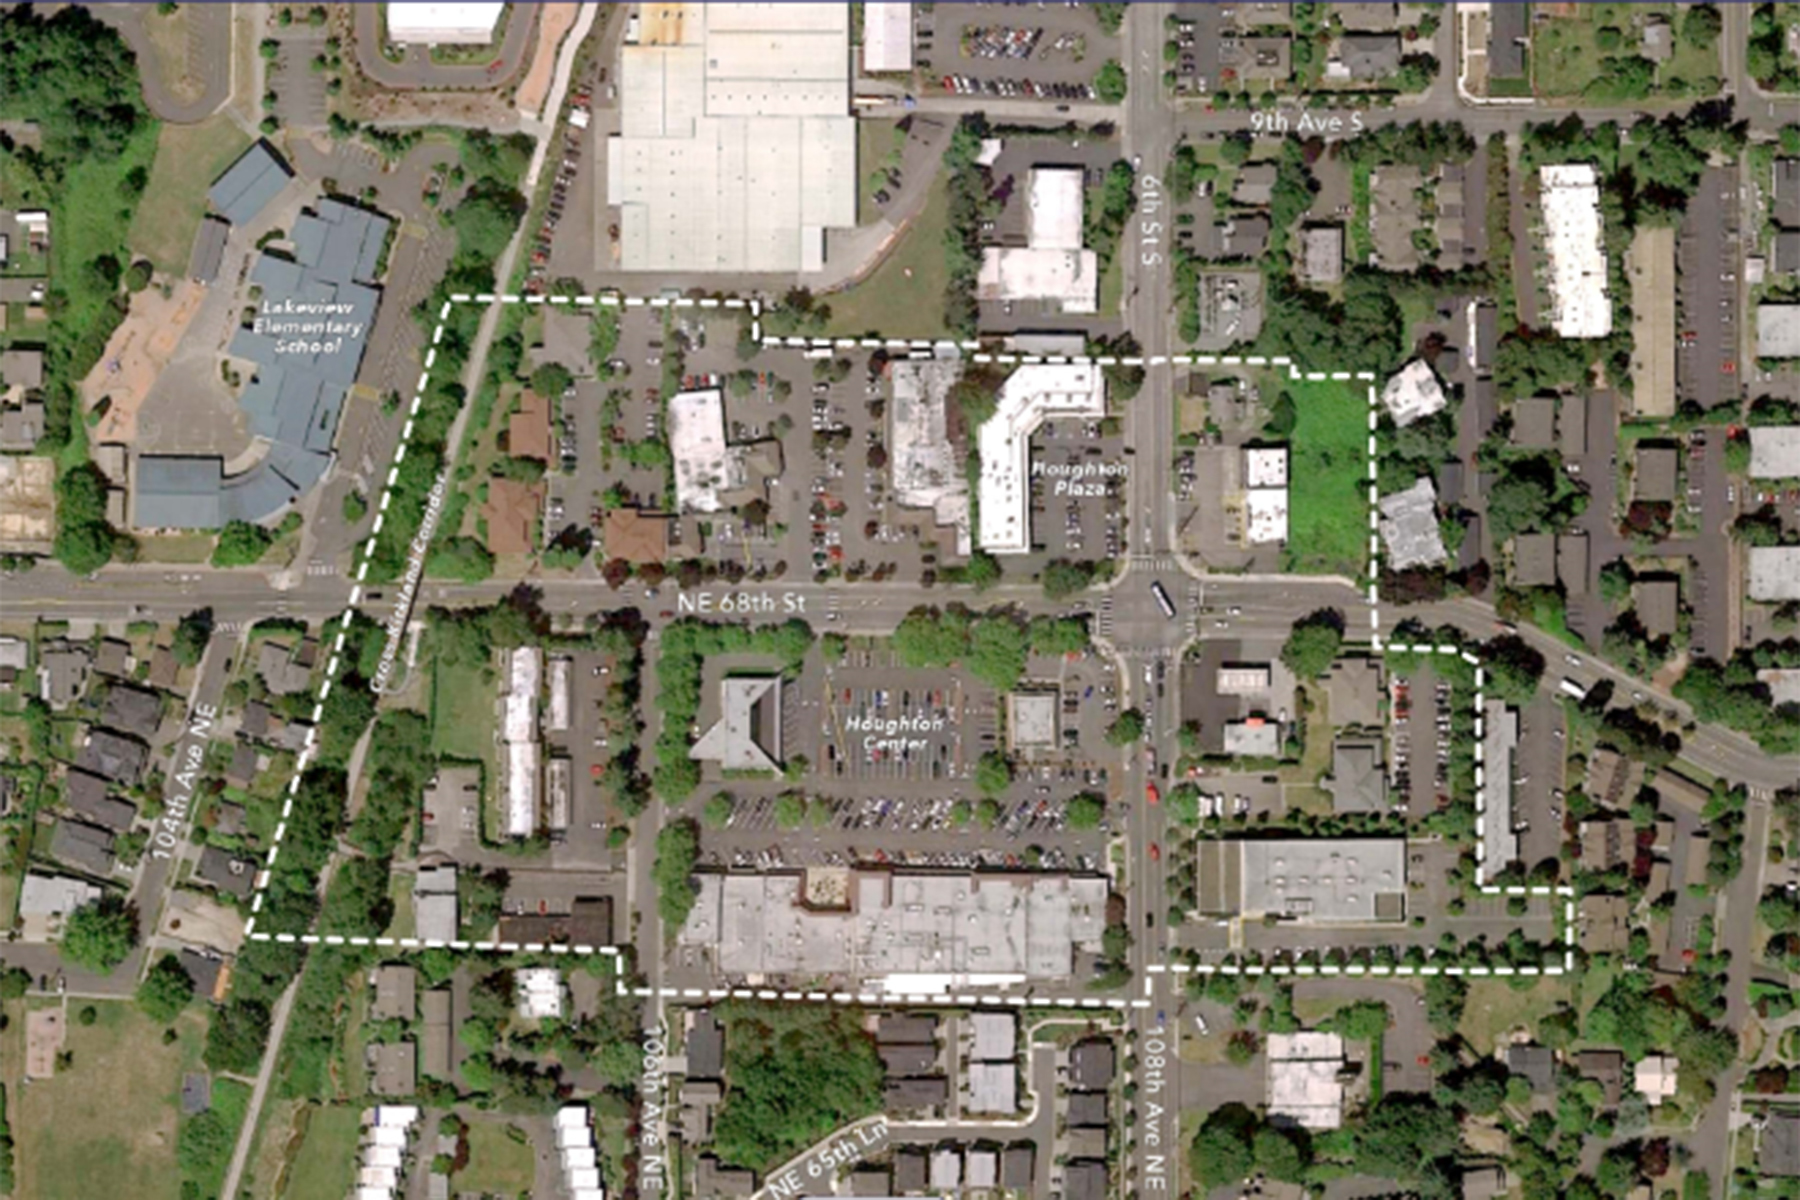 A map provided by the City of Kirkland shows the Houghton Everest Neighborhood Center (inside the dashed white line), the area being examined by the city for possible zoning code amendments. Submitted art